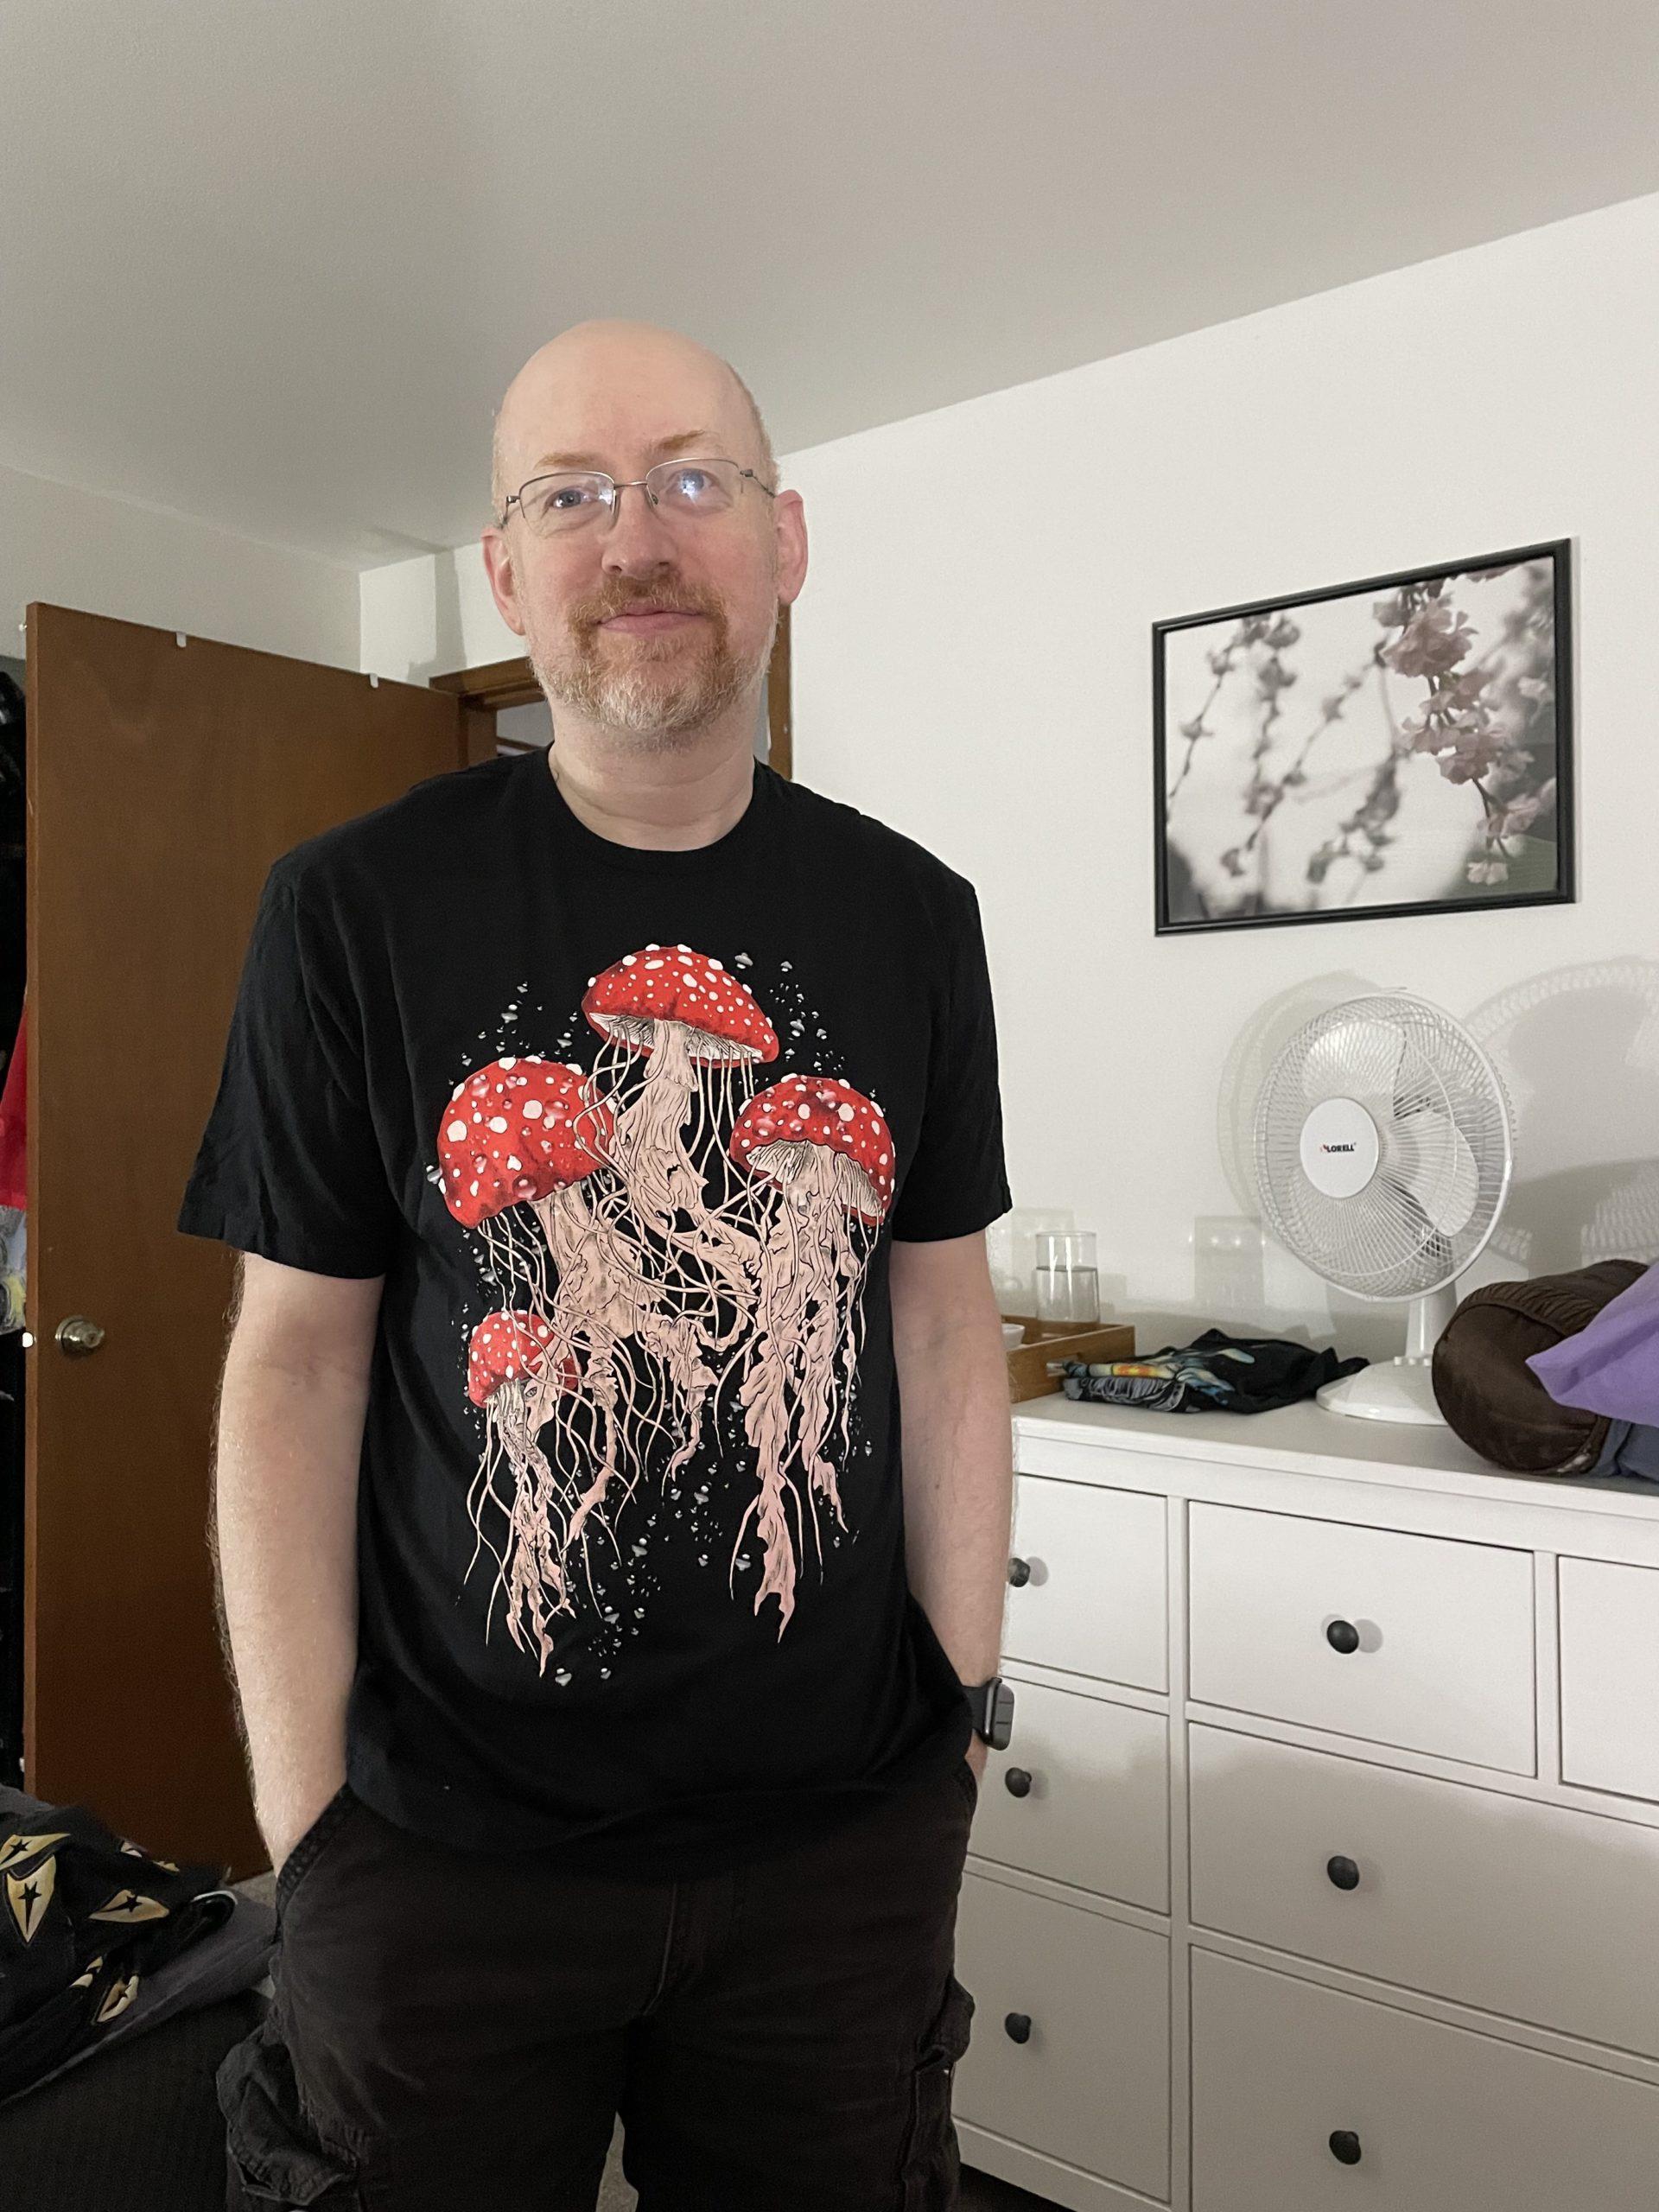 Me standing in our bedroom in front of a white dresser. I'm wearing black shorts and a black t-shirt with a print of jellyfish, but the tops look like amanita muscaria mushrooms, with white-dotted red caps.